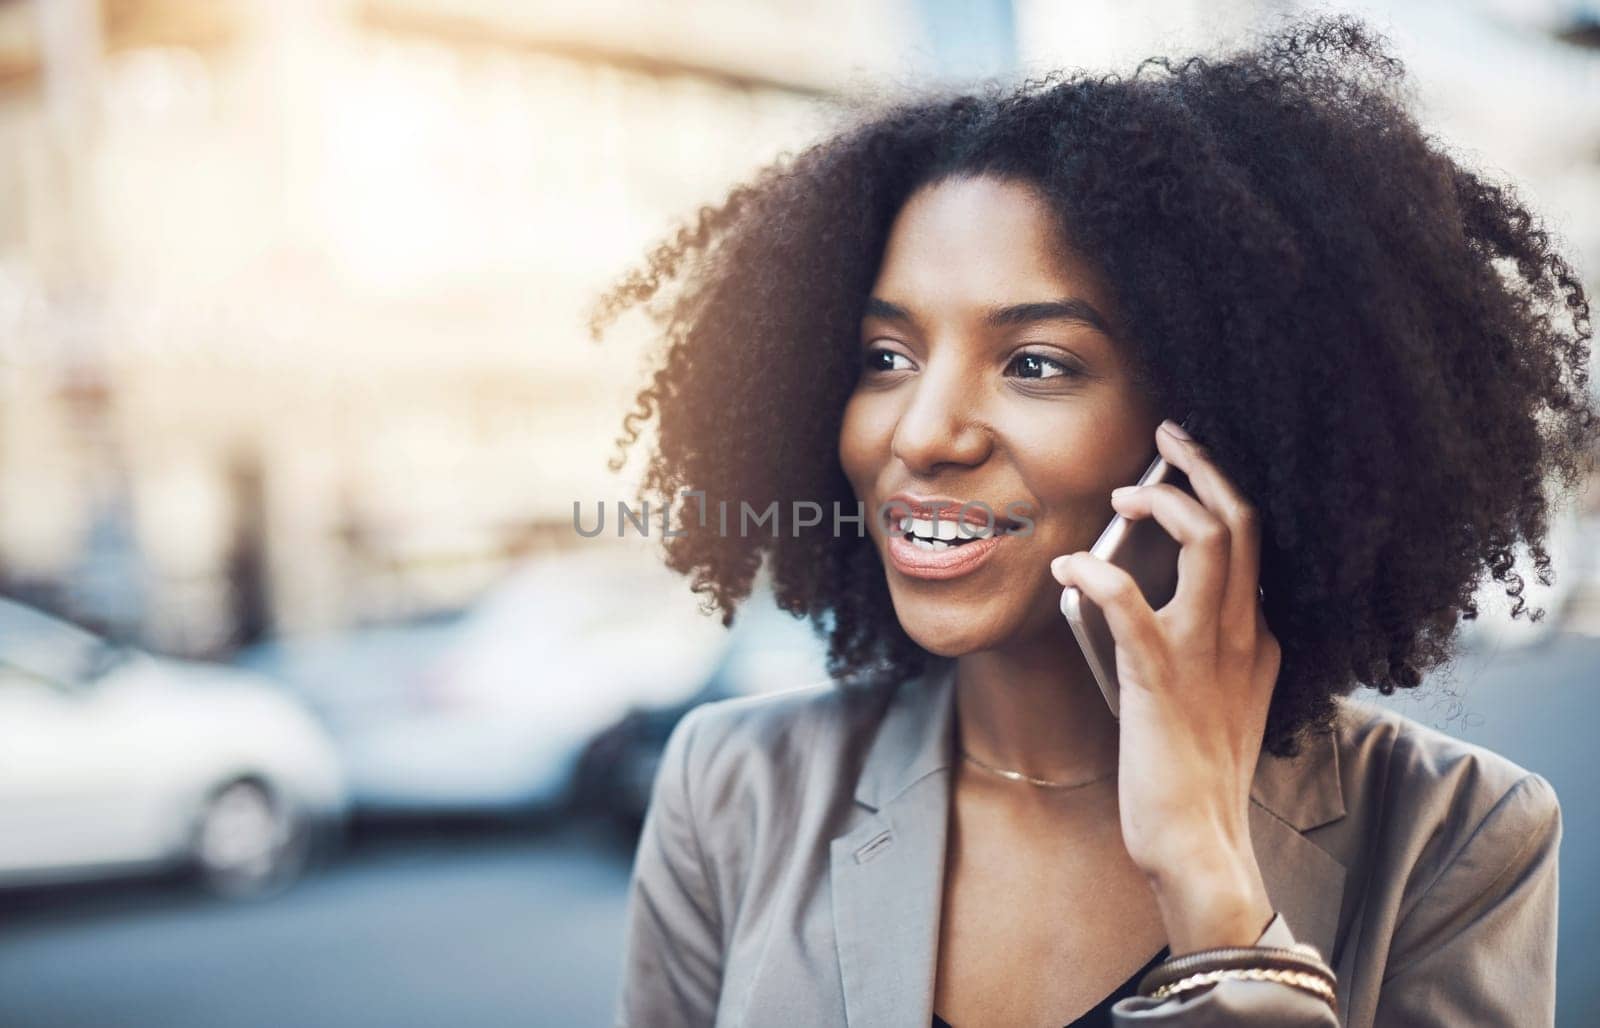 Business woman, phone call and city for conversation, communication or networking outdoors. Female employee talking on mobile smartphone with smile for discussion in the street of an urban town.